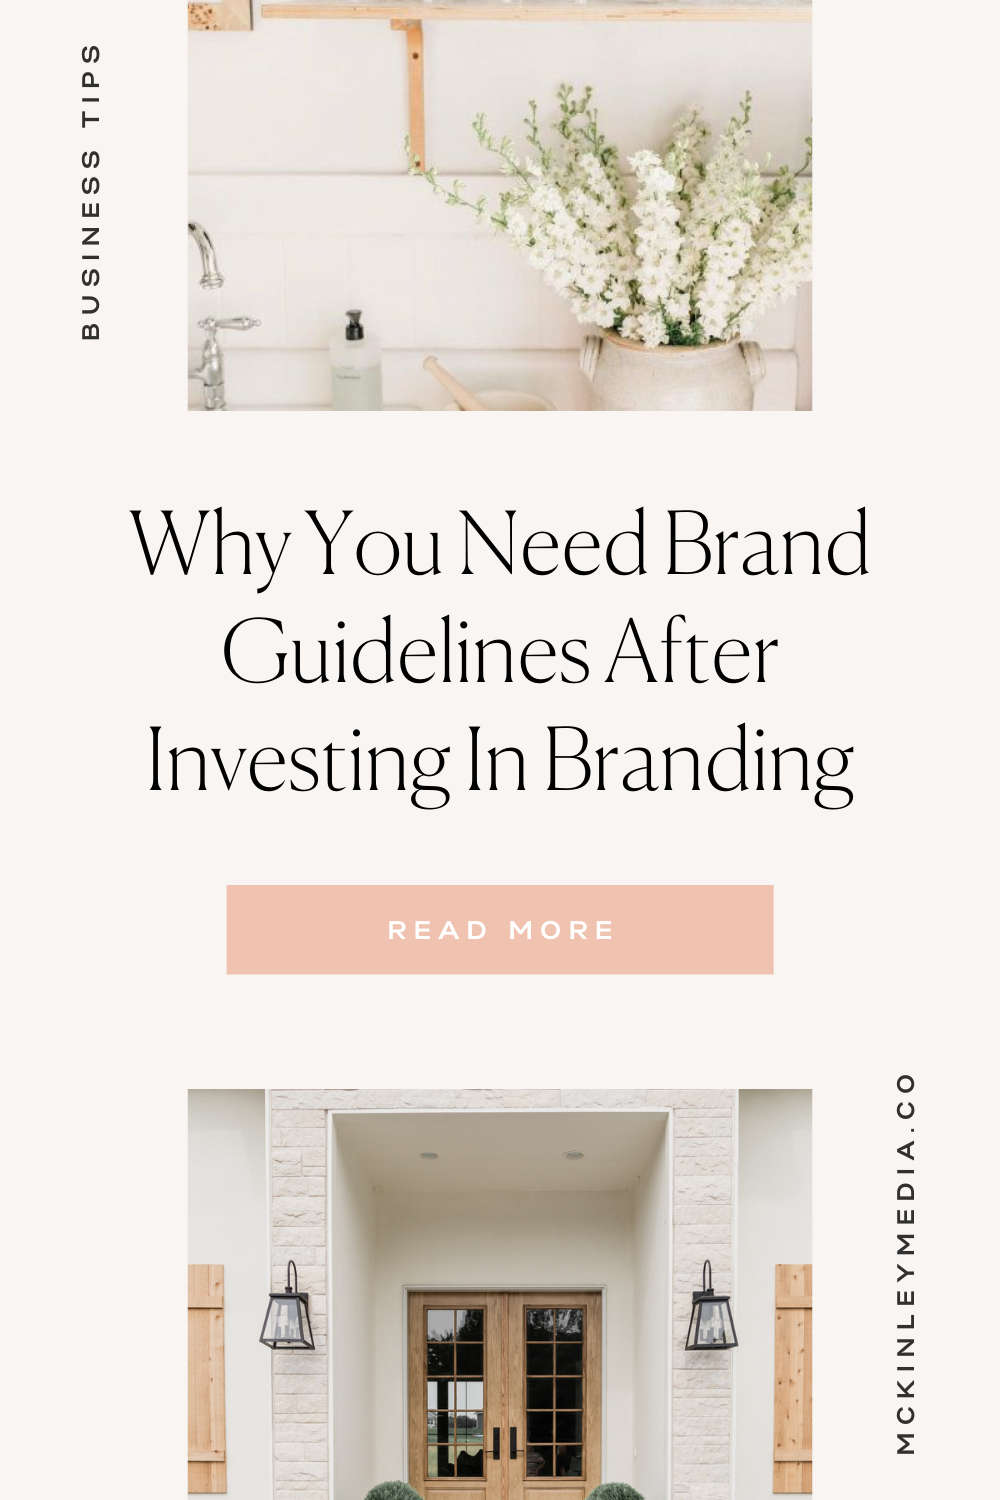 brand design tips - why you need brand guidelines